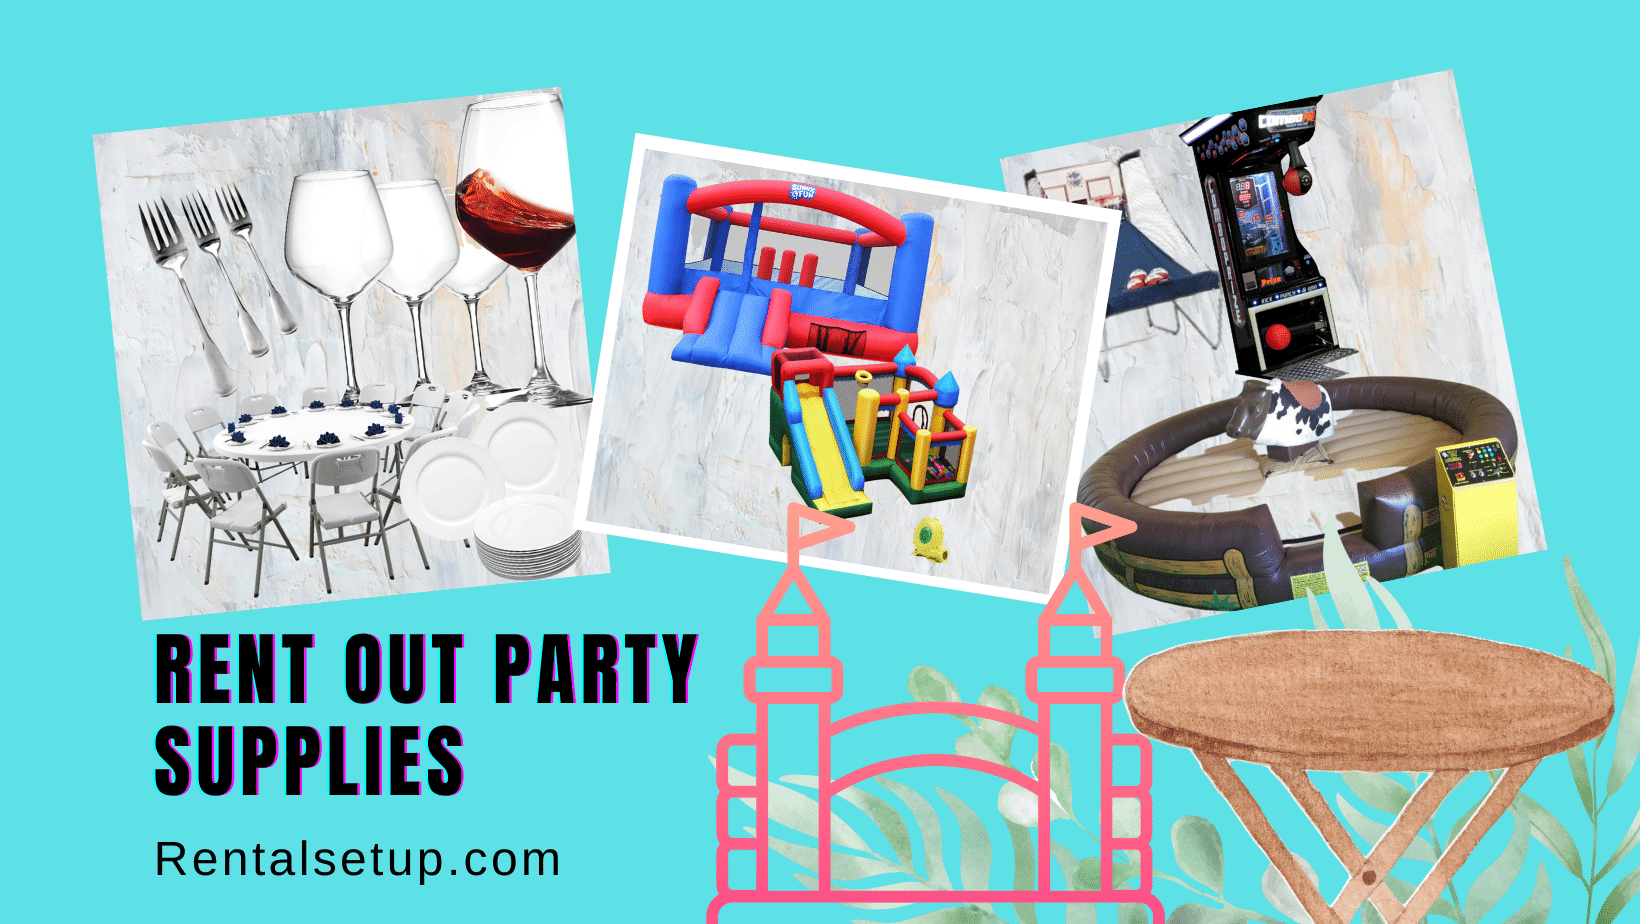 party rental software and event rental software. Party rental website builder